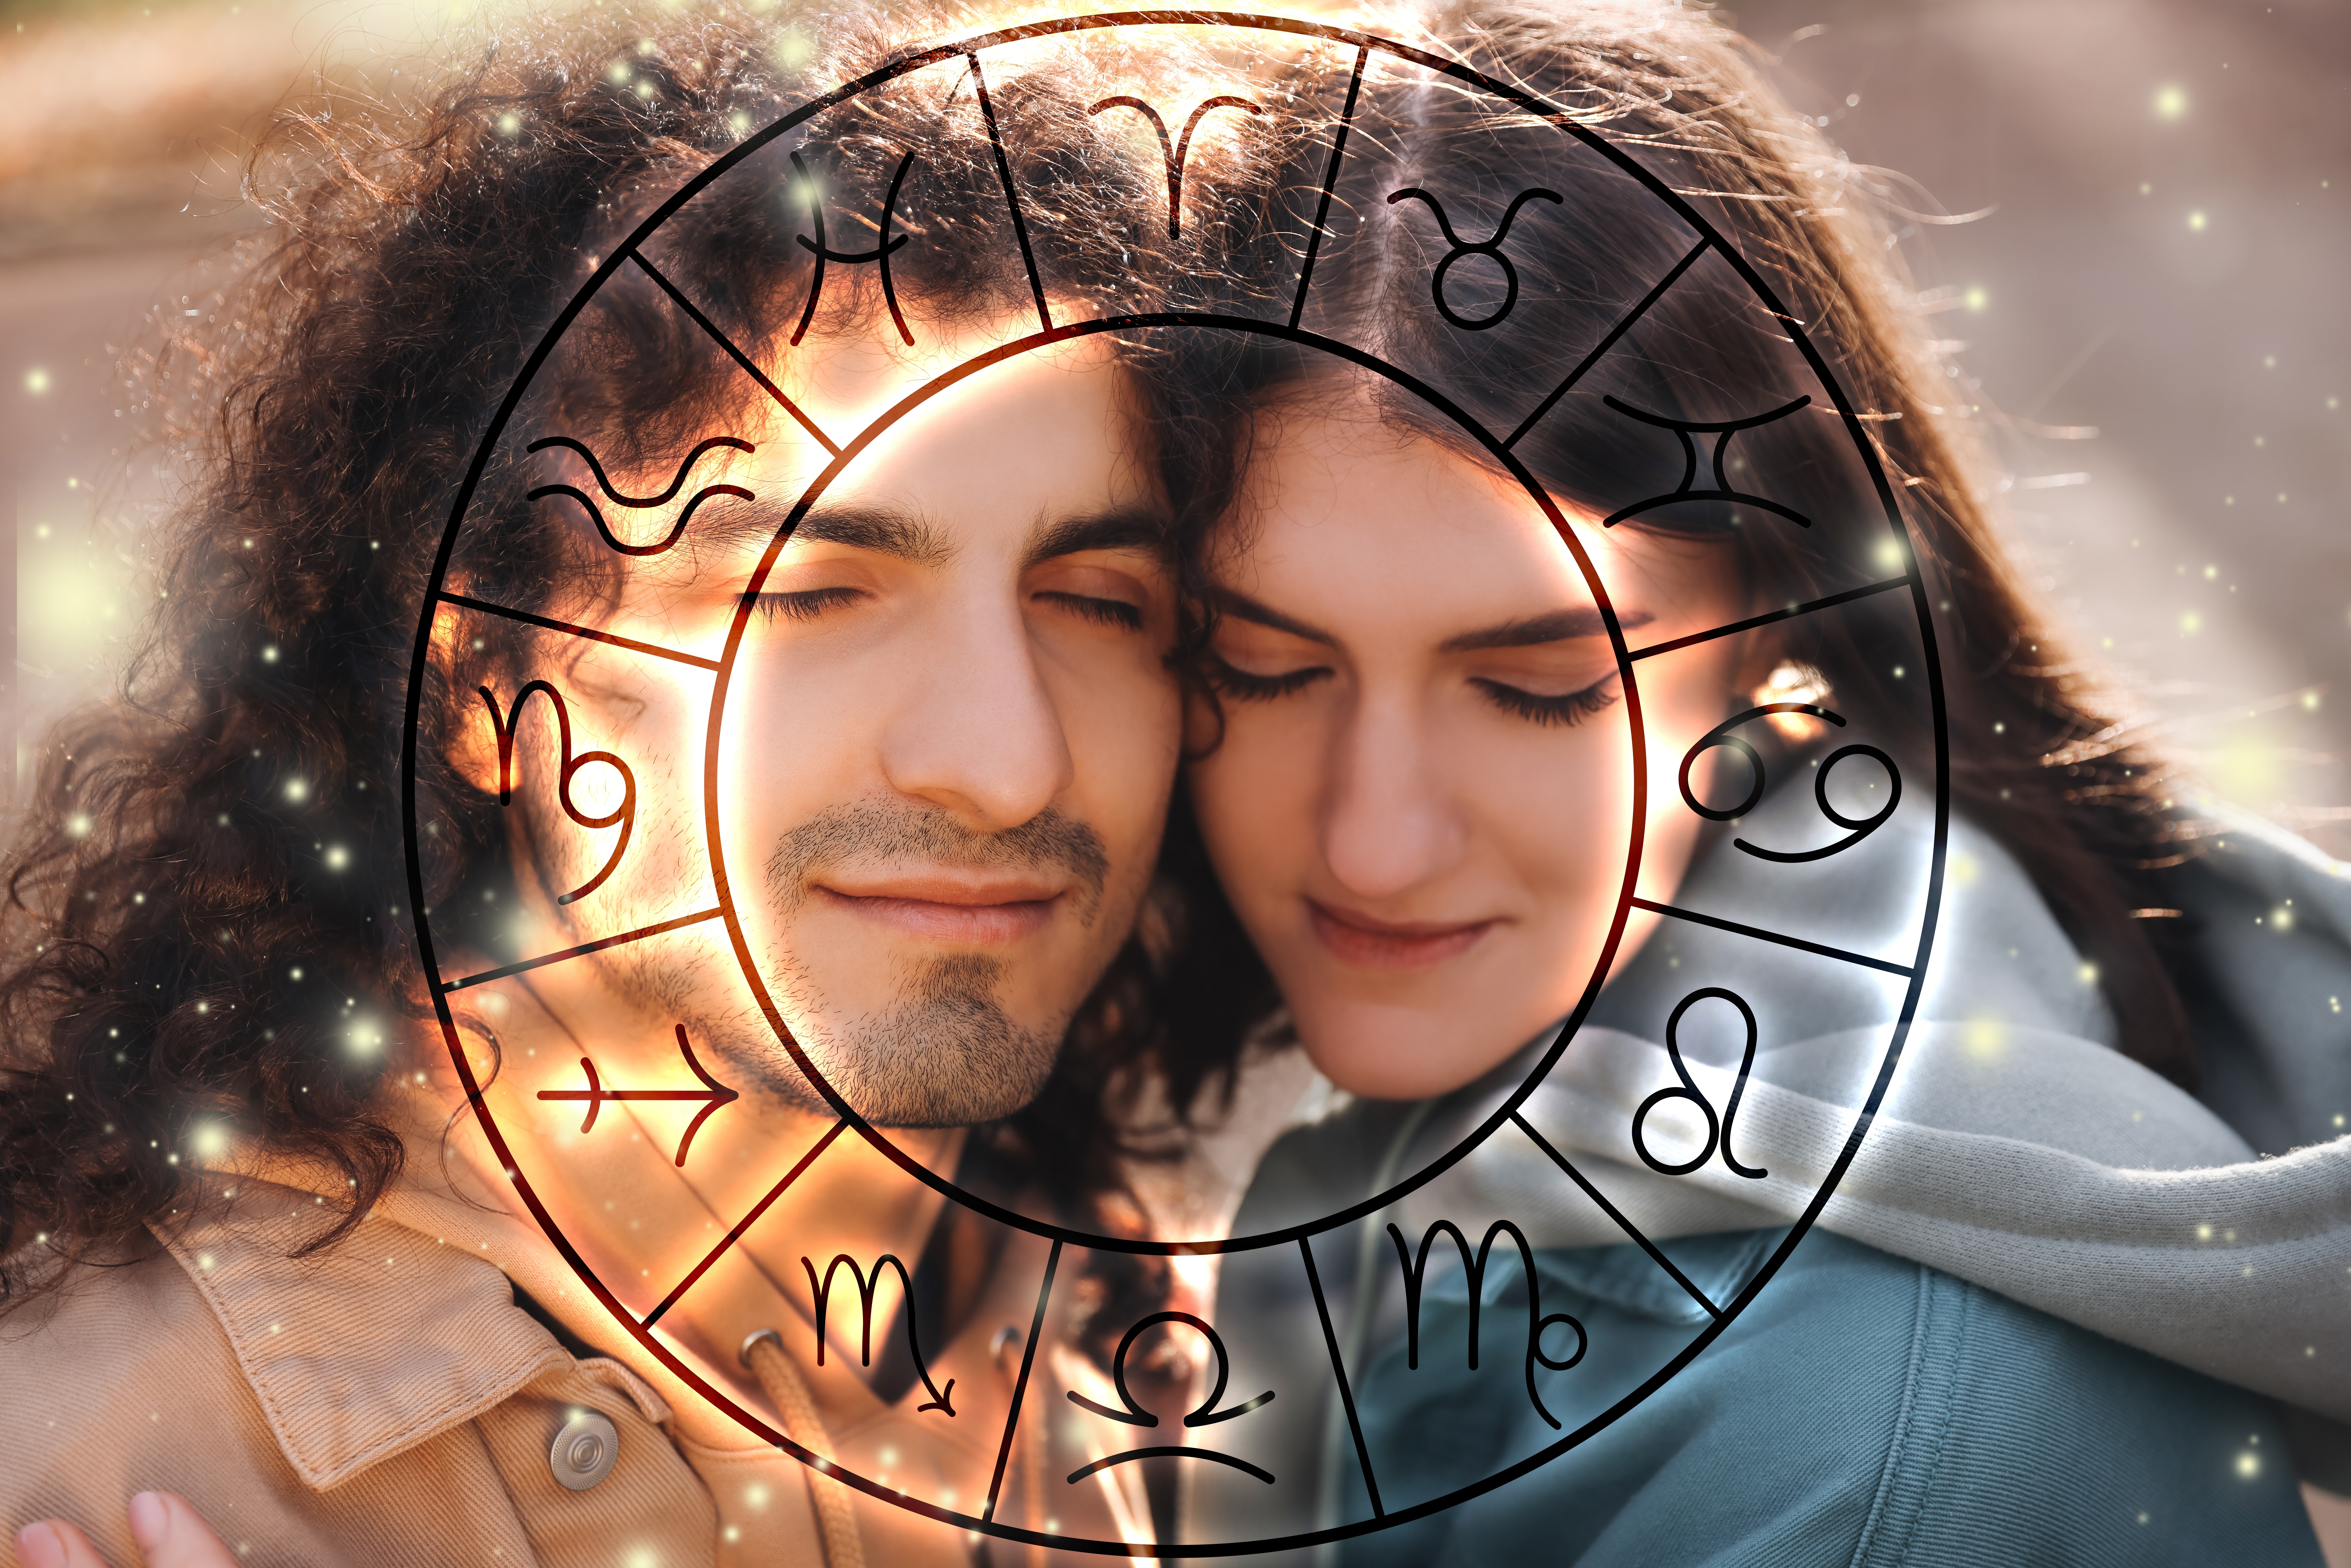 Loving couple outdoors and zodiac wheel. | Source: Shutterstock